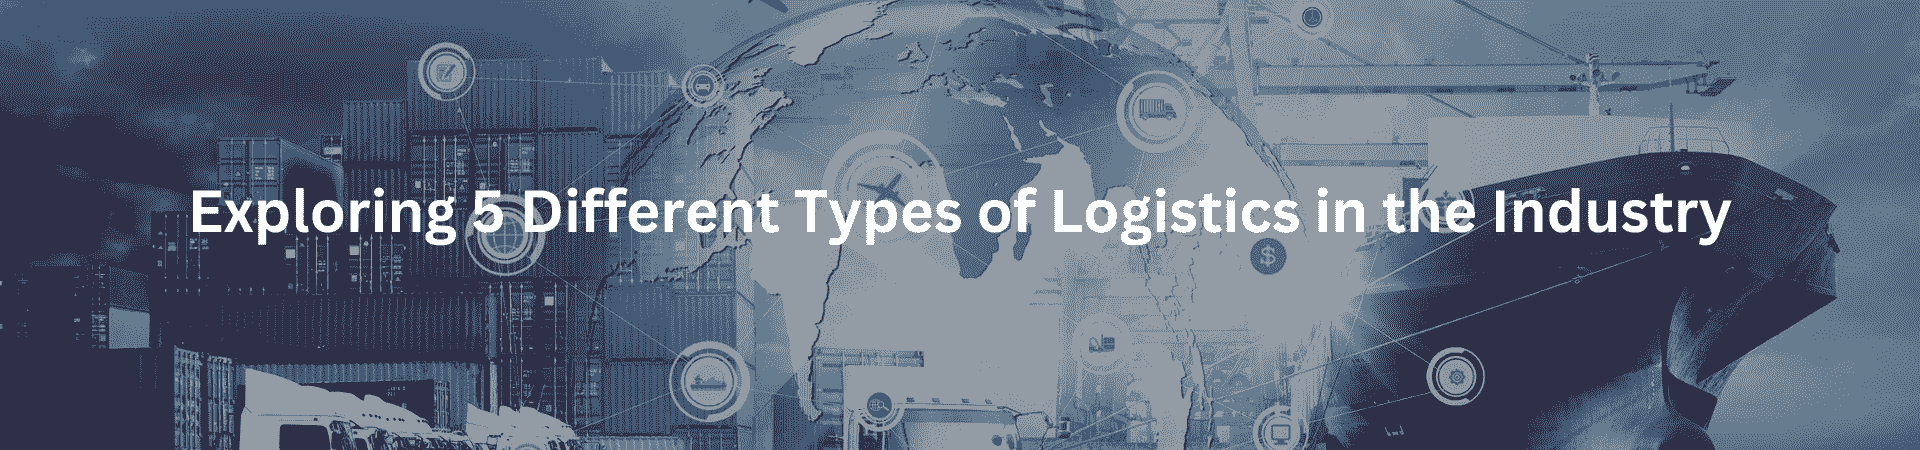 Exploring 5 Different Types of Logistics in the Industry